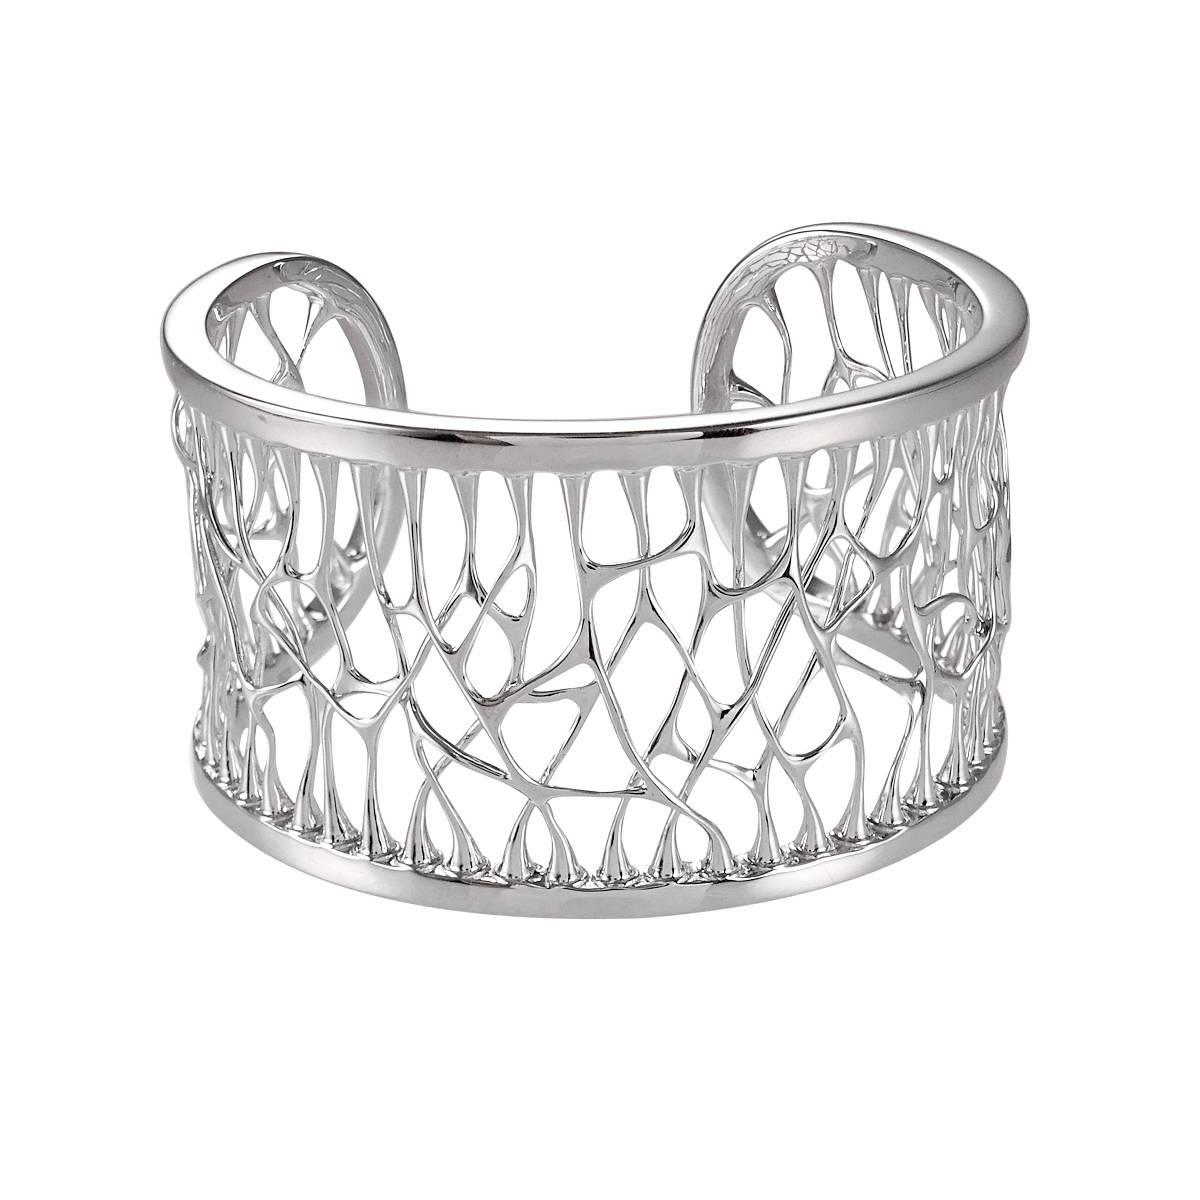 This Sterling Silver Web Cuff is created based on fractal root systems. This piece was designed to evoke personal power. This cuff was inspired by the universal birth and created using cutting-edge design tools. This intricately crafted, limited